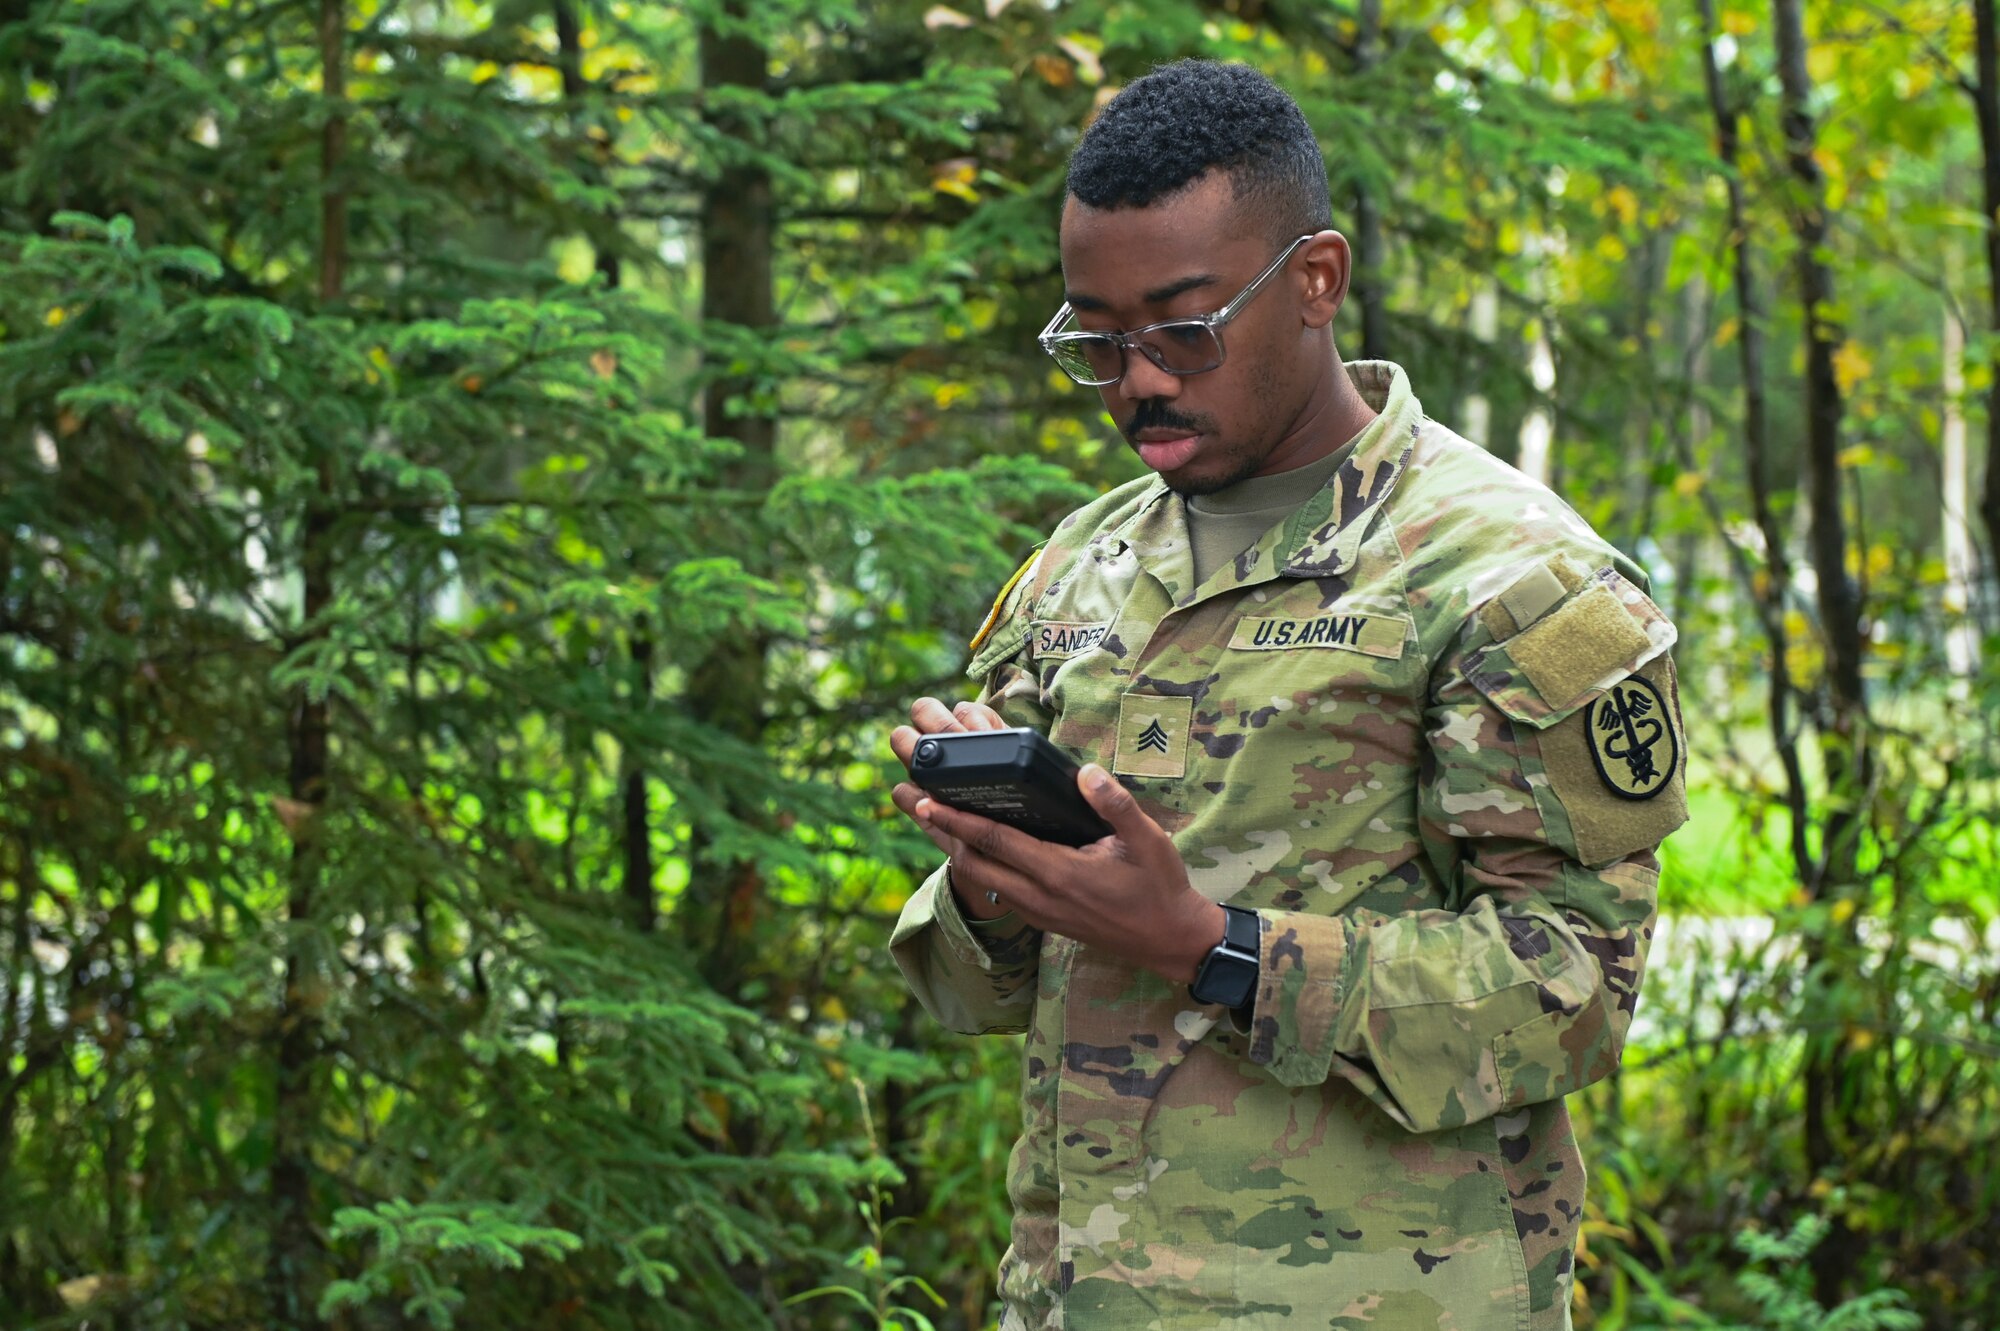 U.S. Army Sgt. Joshua Sanders uses a small device in his hands